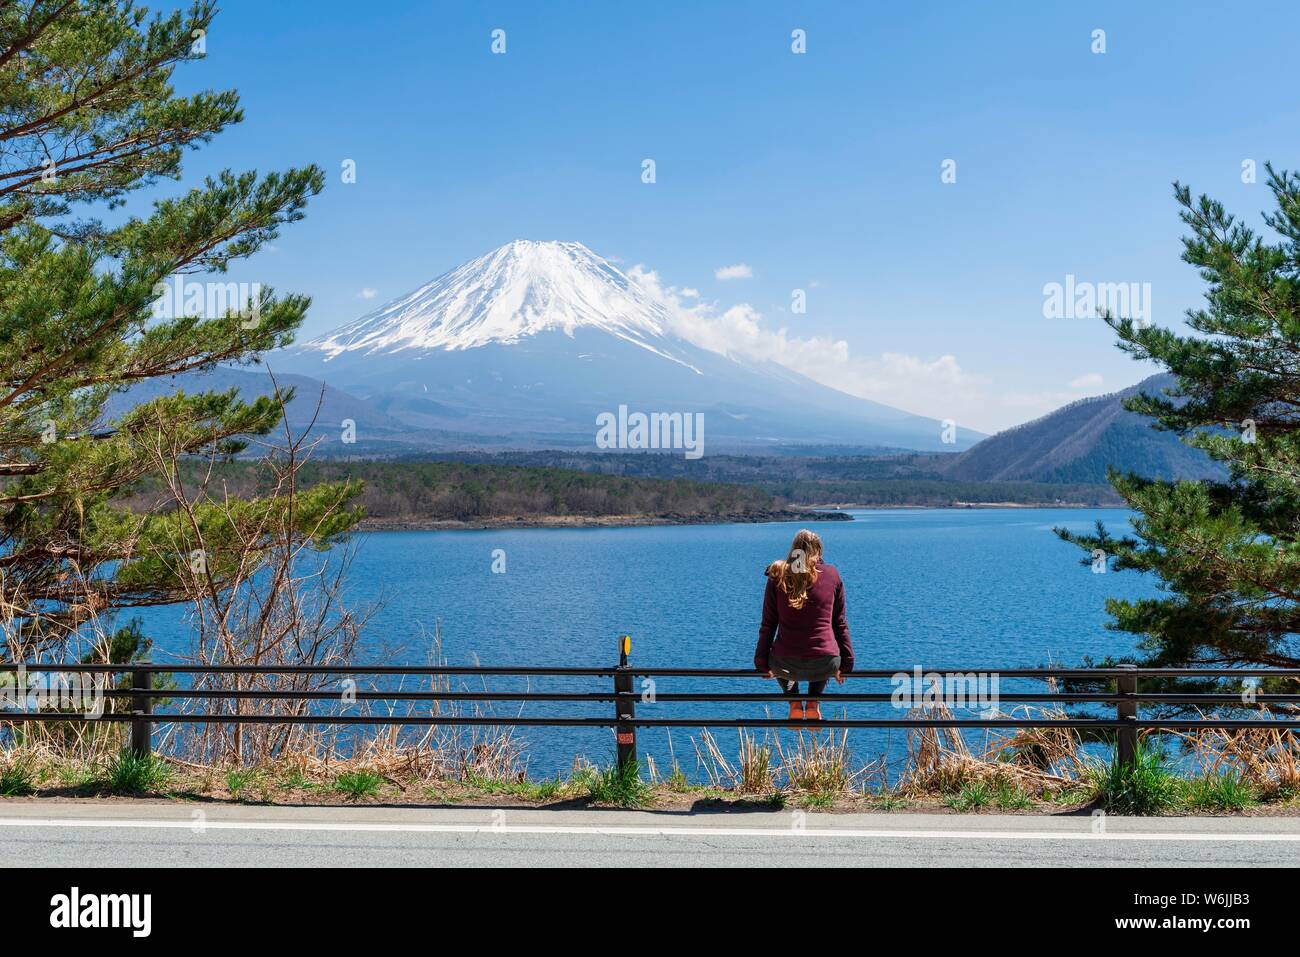 Young woman sitting on a railing next to a road and looking across the lake to the volcano Mt Fuji, Motosu Lake, Yamanashi Prefecture, Japan Stock Photo